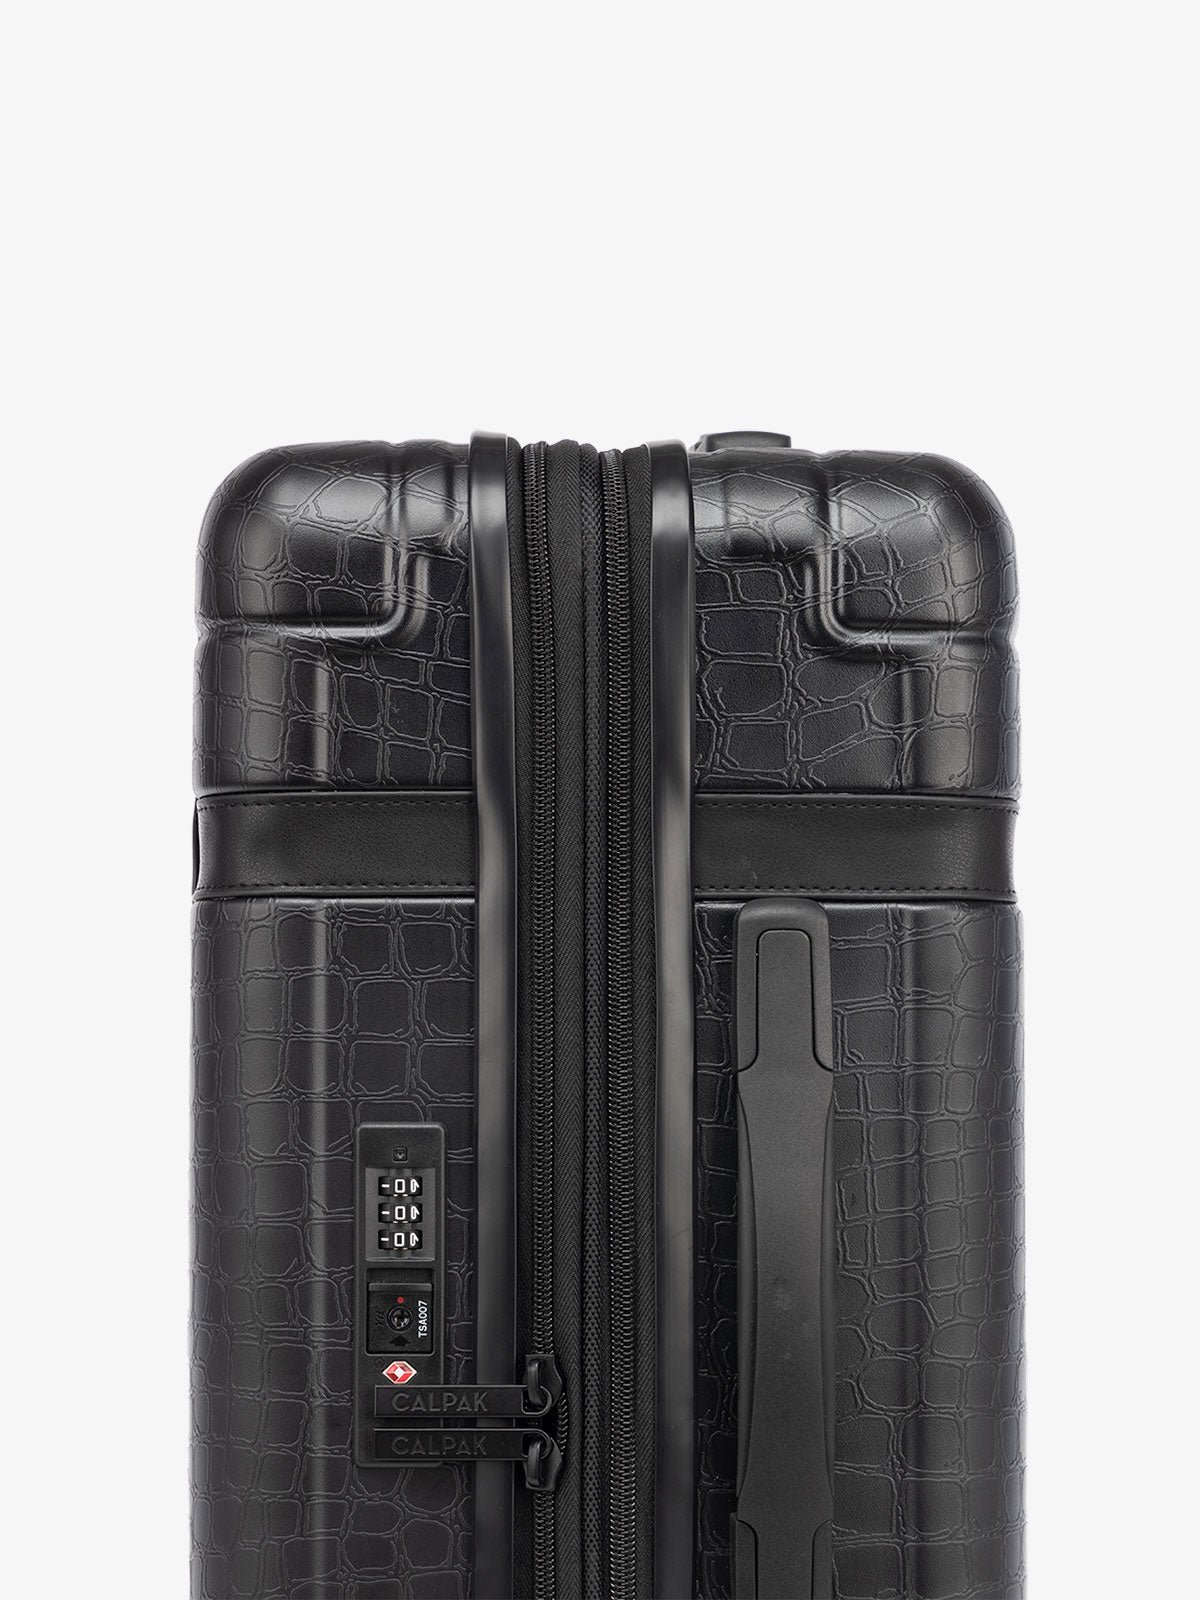 trnk carry-on luggage with tsa approved lock